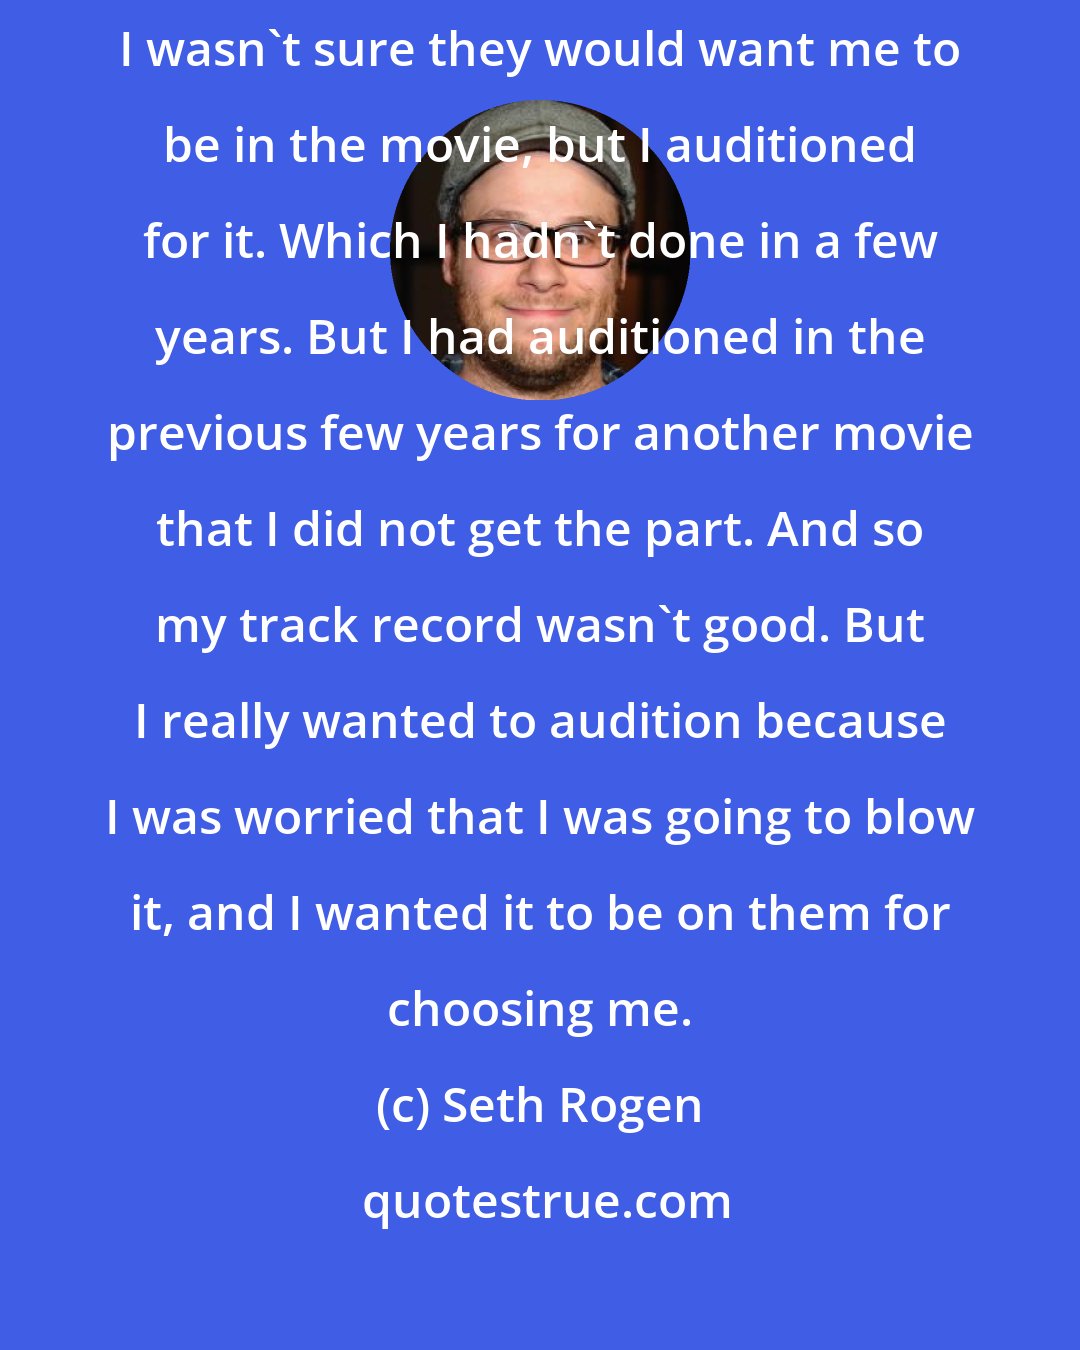 Seth Rogen: I read the script [ of 'Steve Jobs' movie ], and it was very, very good. I wasn't sure they would want me to be in the movie, but I auditioned for it. Which I hadn't done in a few years. But I had auditioned in the previous few years for another movie that I did not get the part. And so my track record wasn't good. But I really wanted to audition because I was worried that I was going to blow it, and I wanted it to be on them for choosing me.